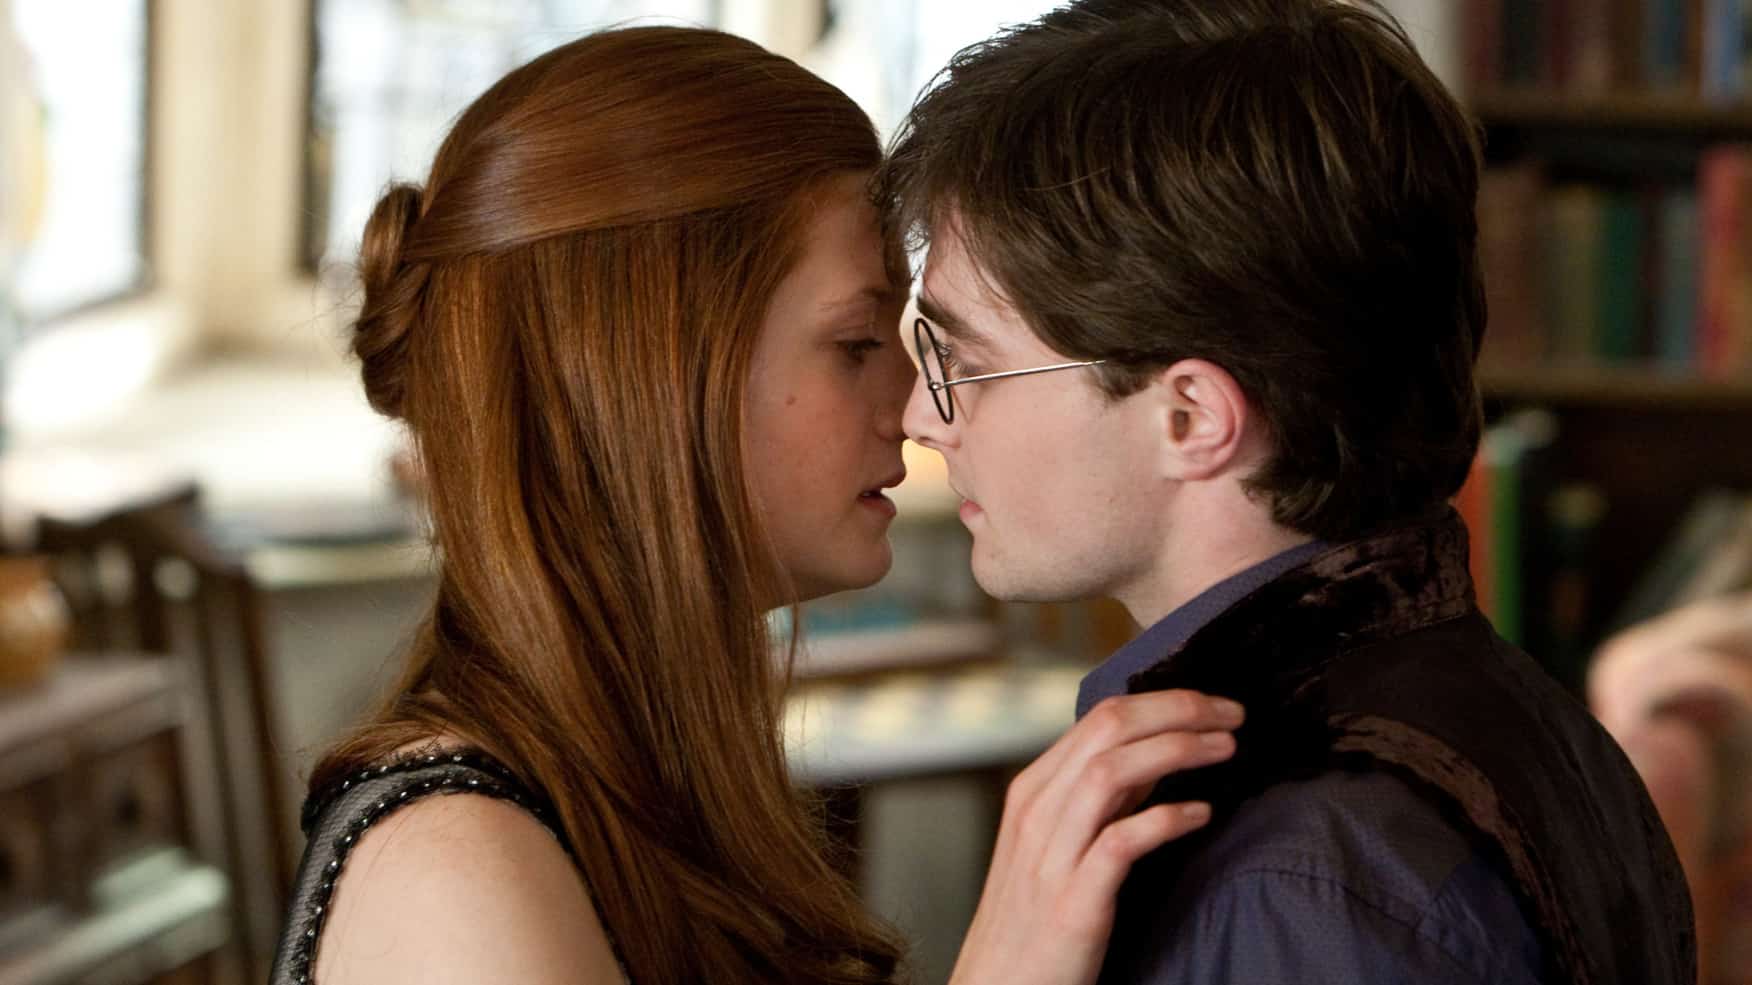 A teen couple is about to kiss in this image from Warner Bros. Pictures.